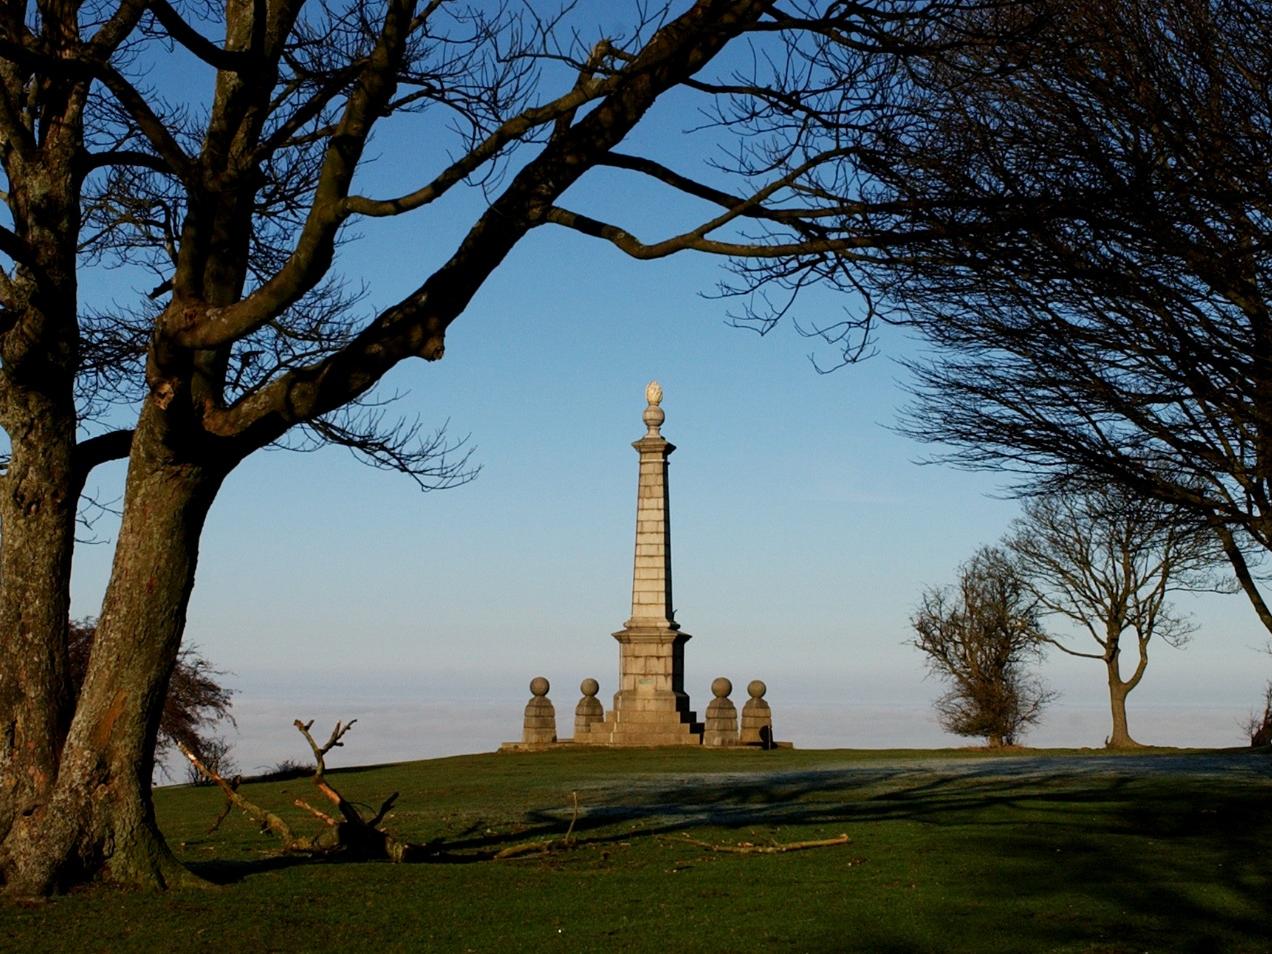 The Wendover monument is the perfect spot to get a bird's eye view of the Vale and beyond